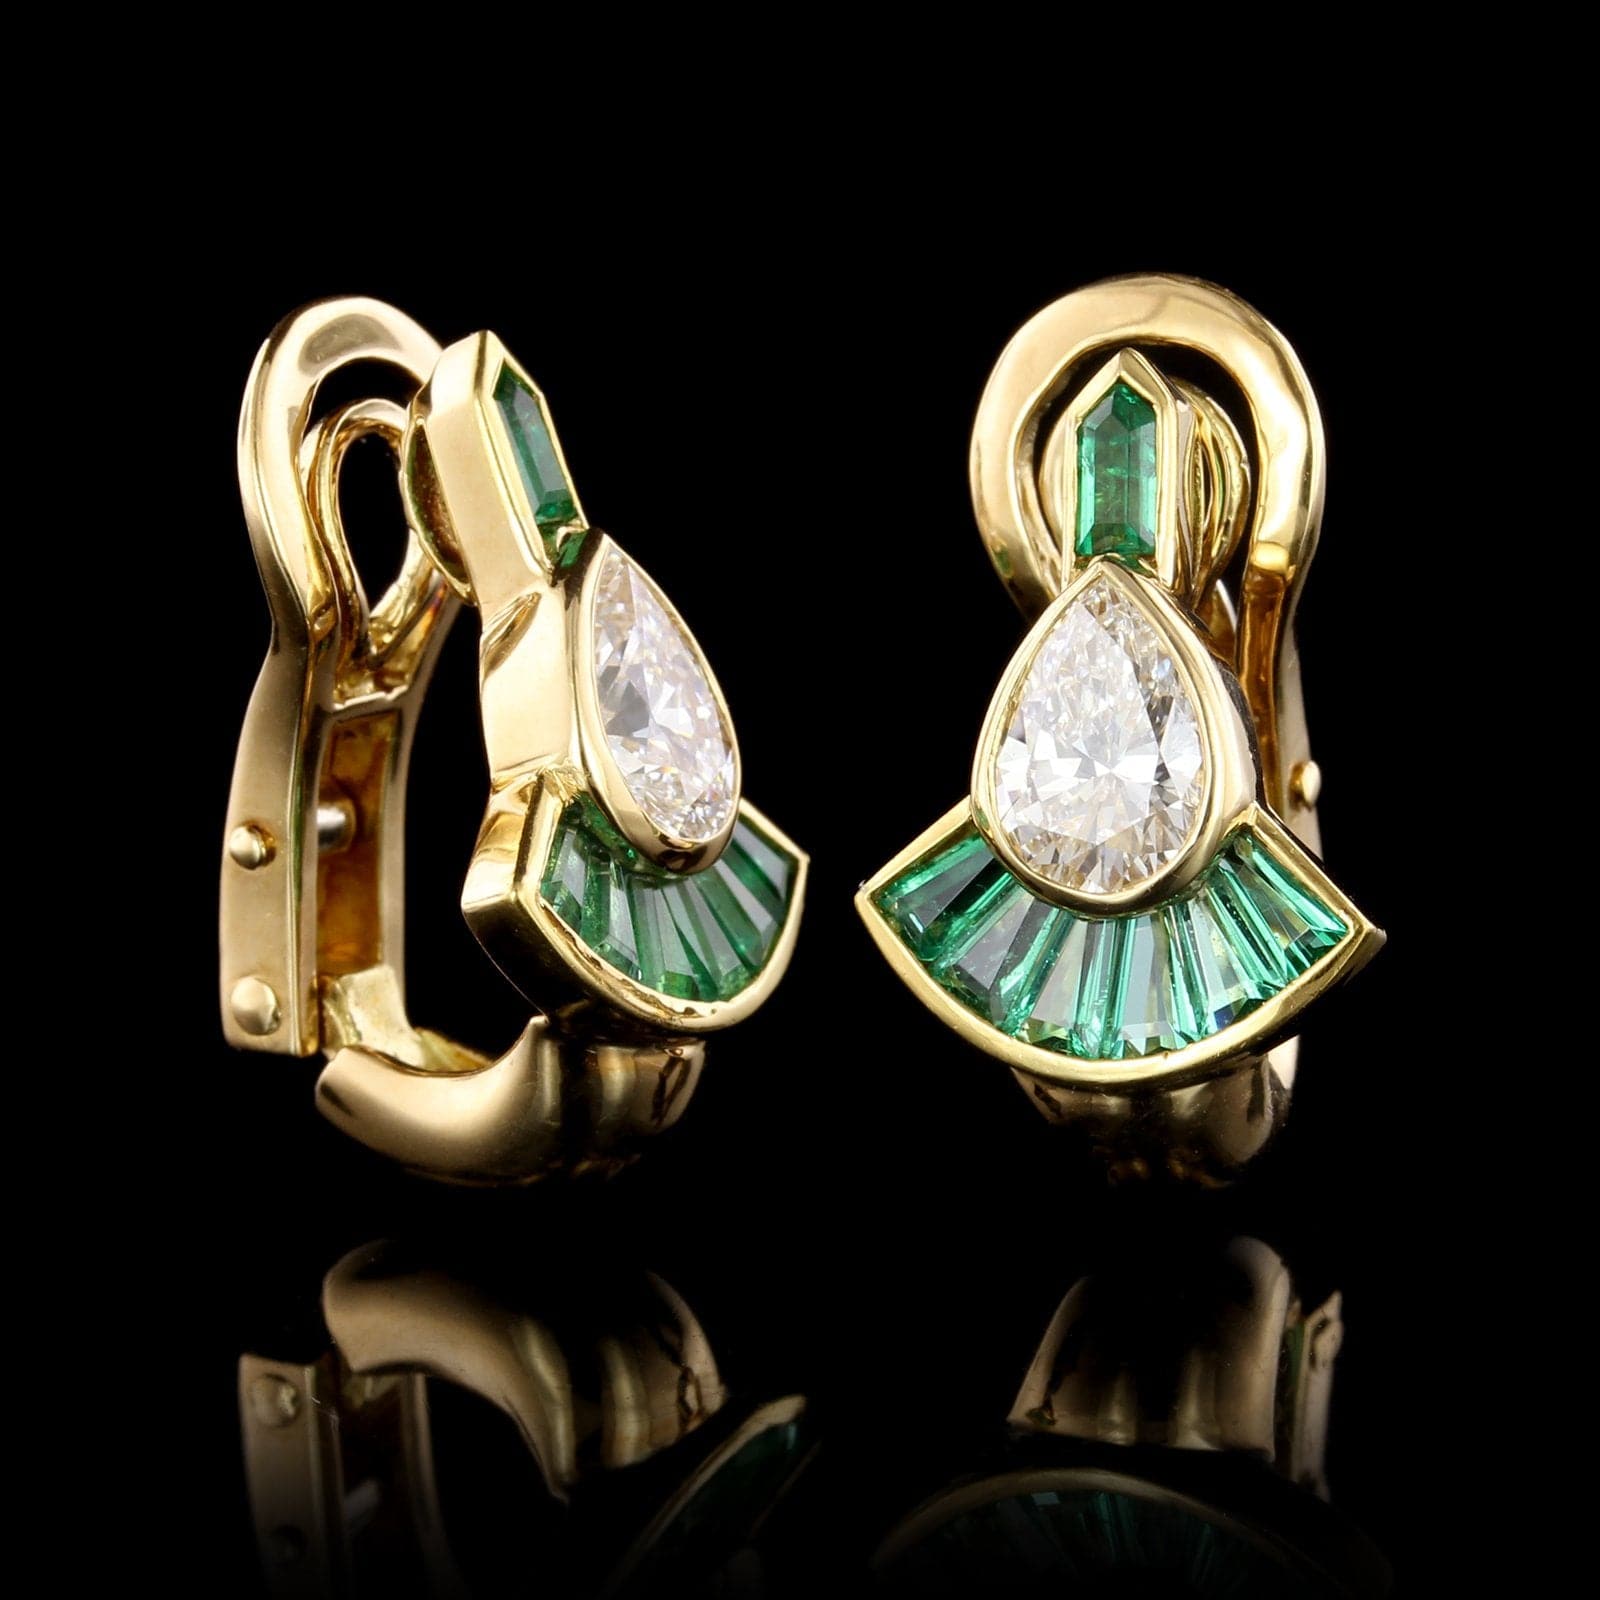 Mellerio Dits Mellor 18K Yellow Gold Diamond and Emerald Earrings, France